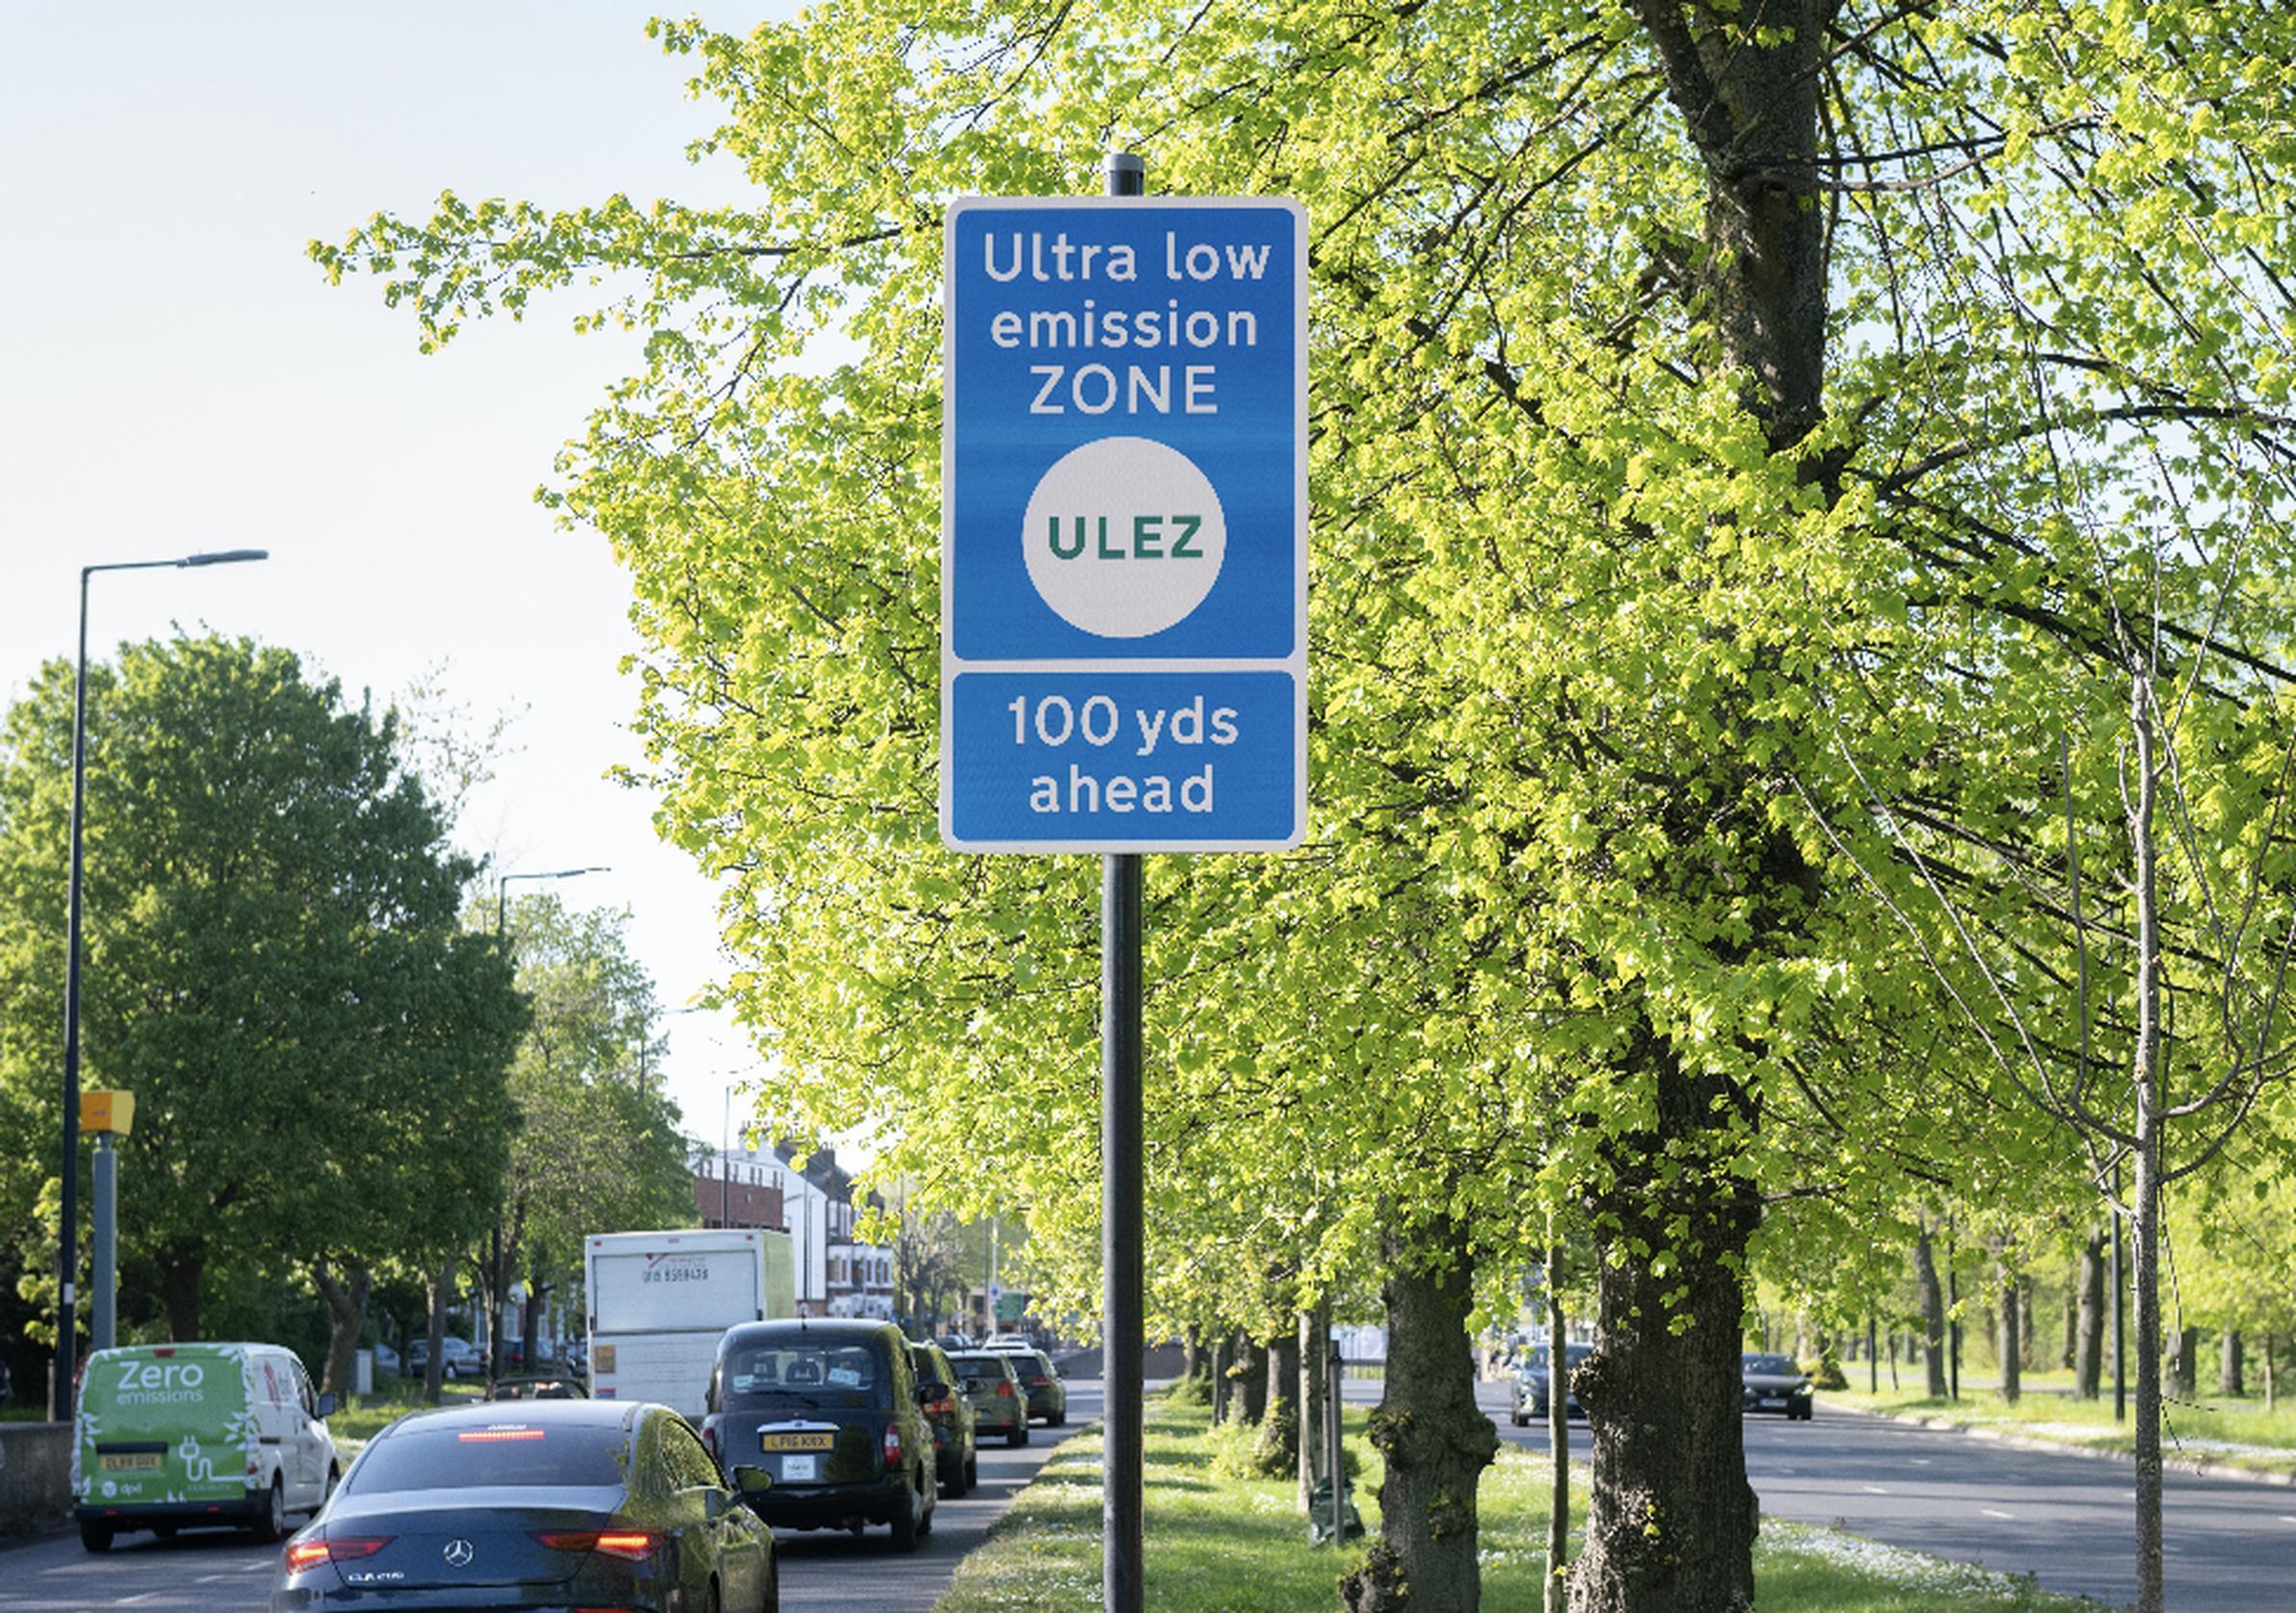 The ULEZ was extended in October 2021 to all areas within the North and South Circular roads